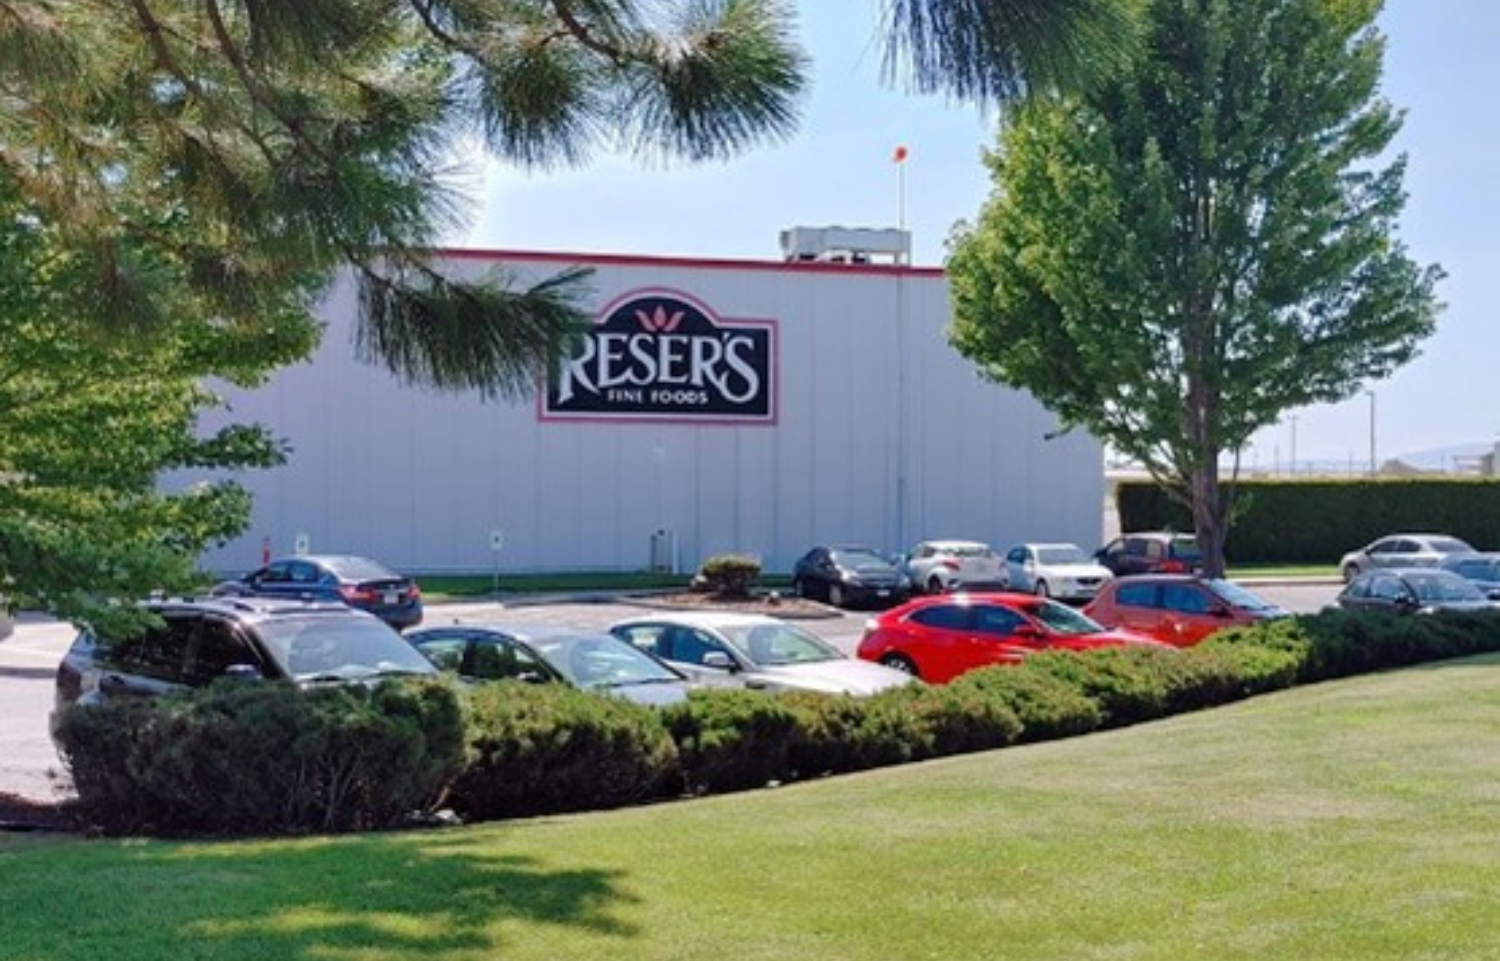 Reser's office building